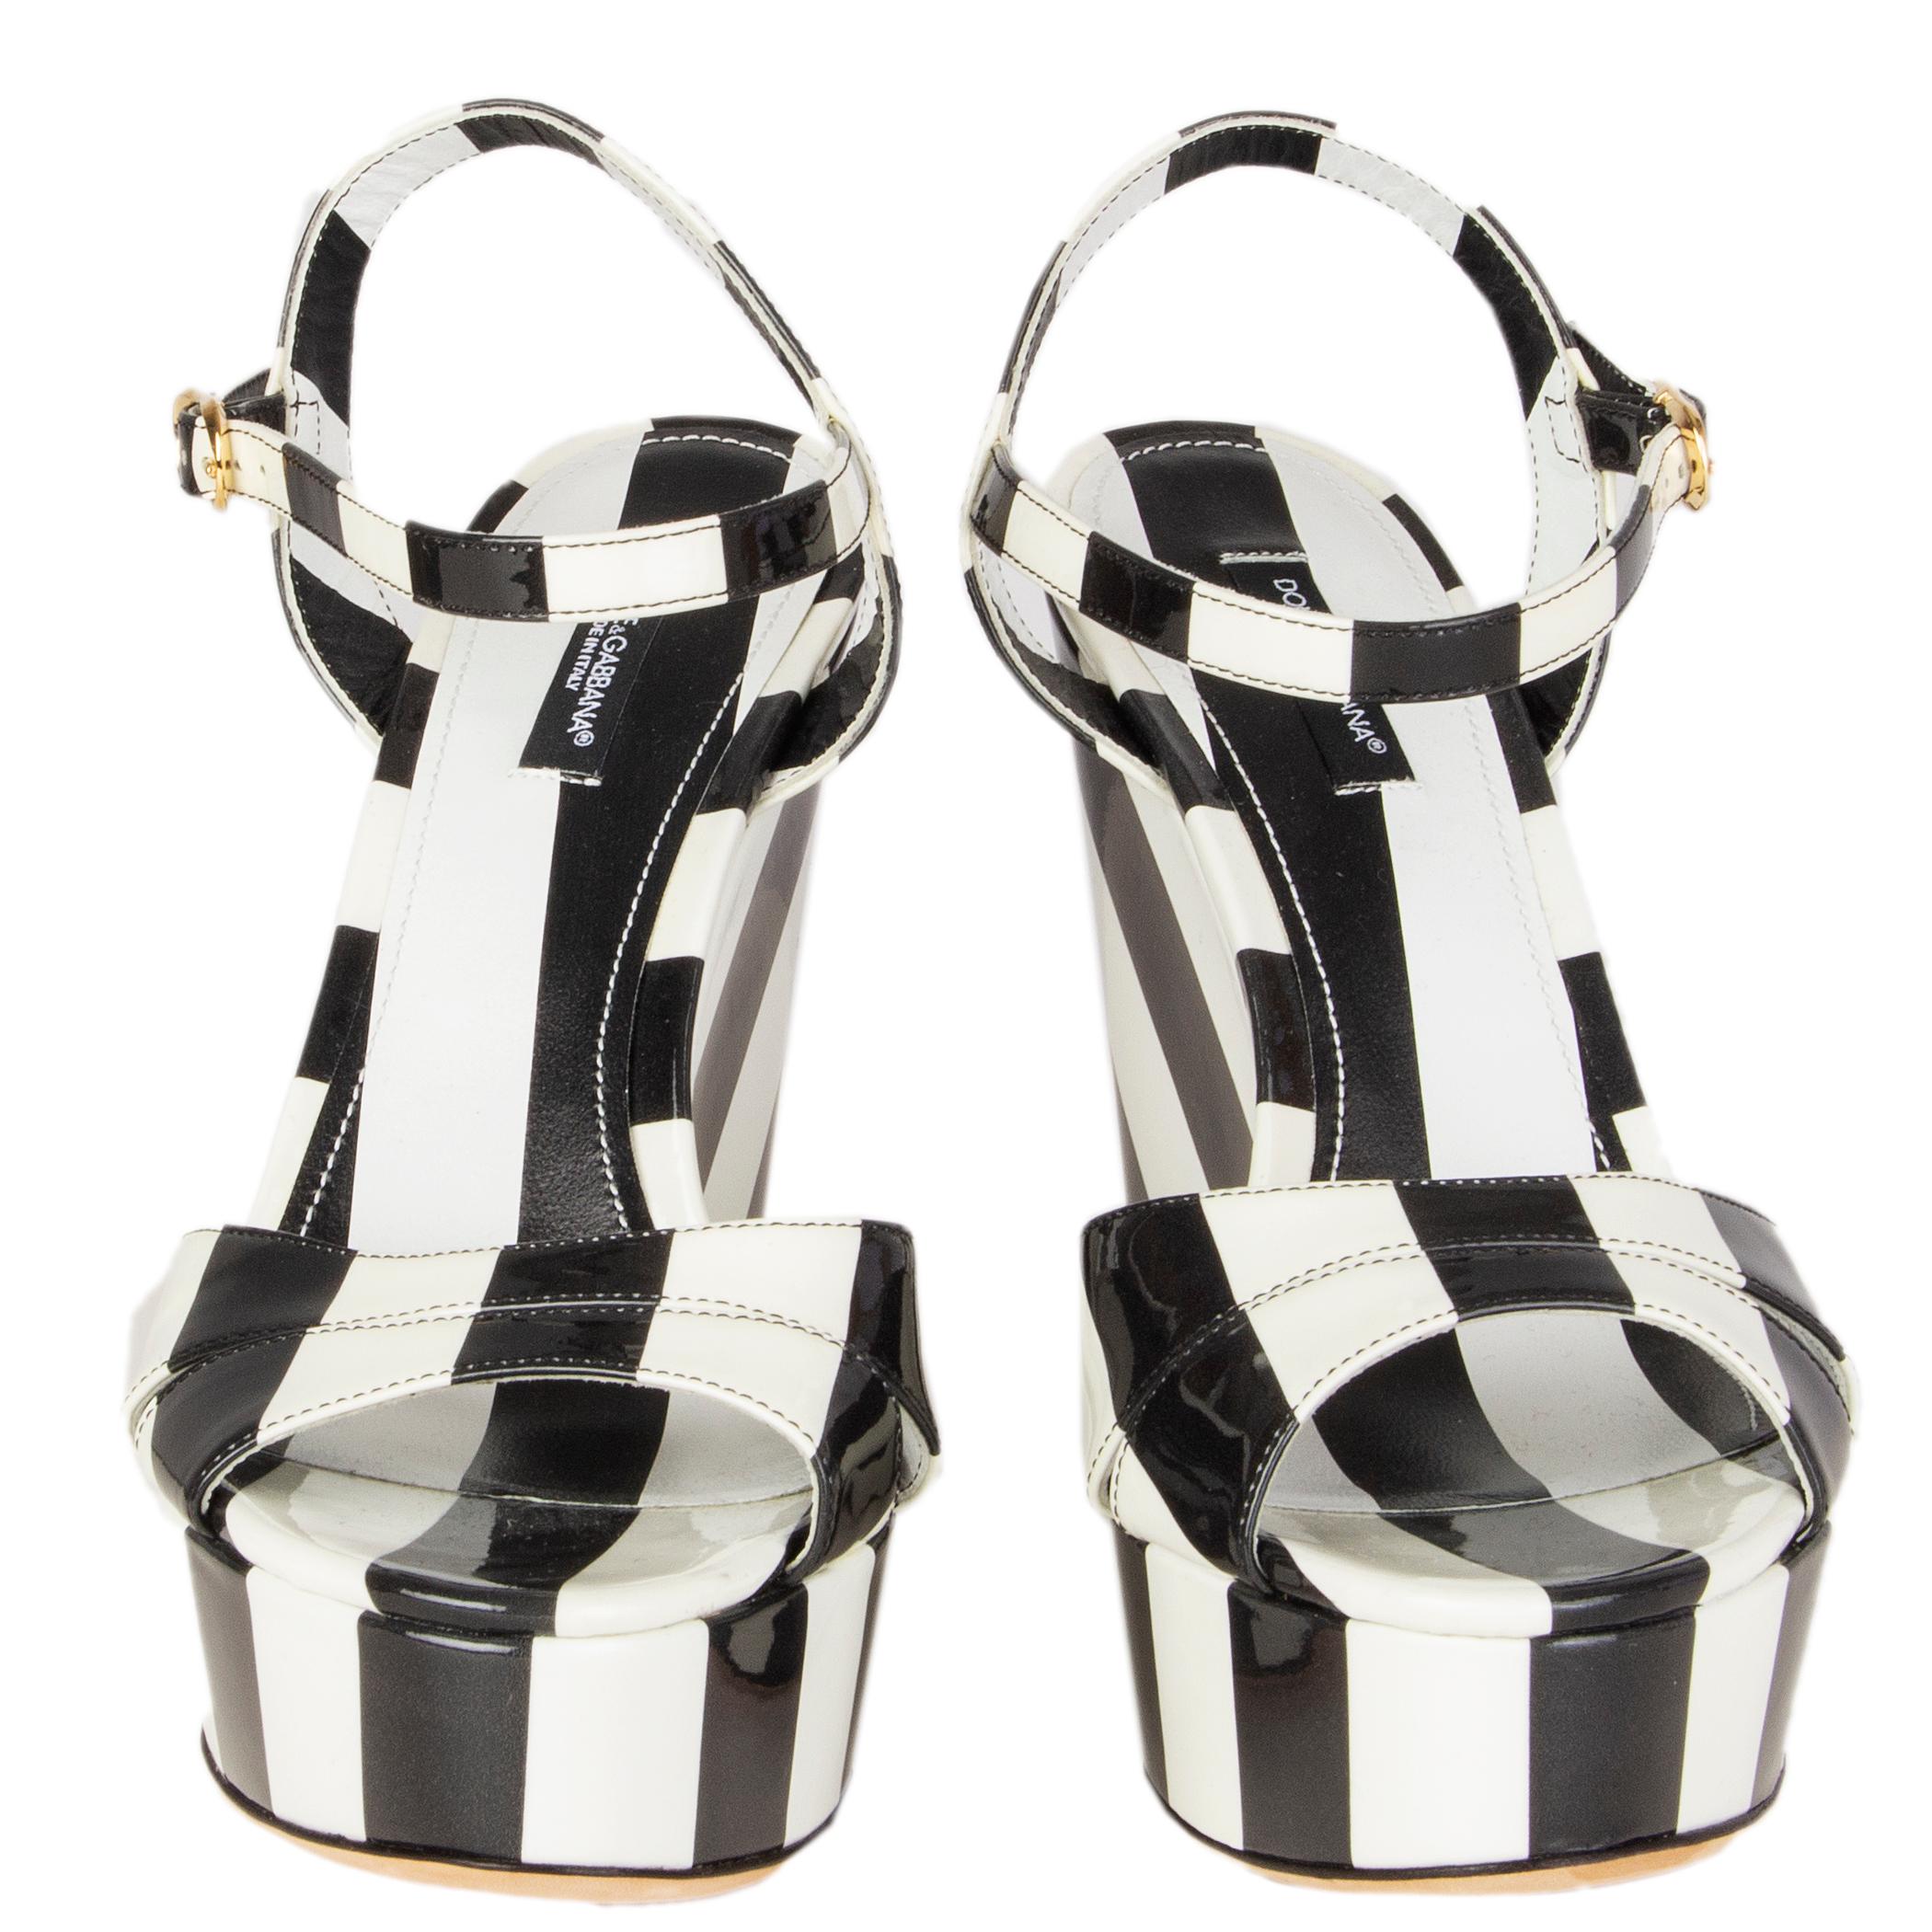 100% authentic Dolce & Gabbana striped wedges in black and white patent leather. Buckle fastening at ankle. Brand new. 

Measurements
Imprinted Size	38
Shoe Size	38
Inside Sole	24.5cm (9.6in)
Width	7.5cm (2.9in)
Heel	13cm (5.1in)
Platform:	4cm